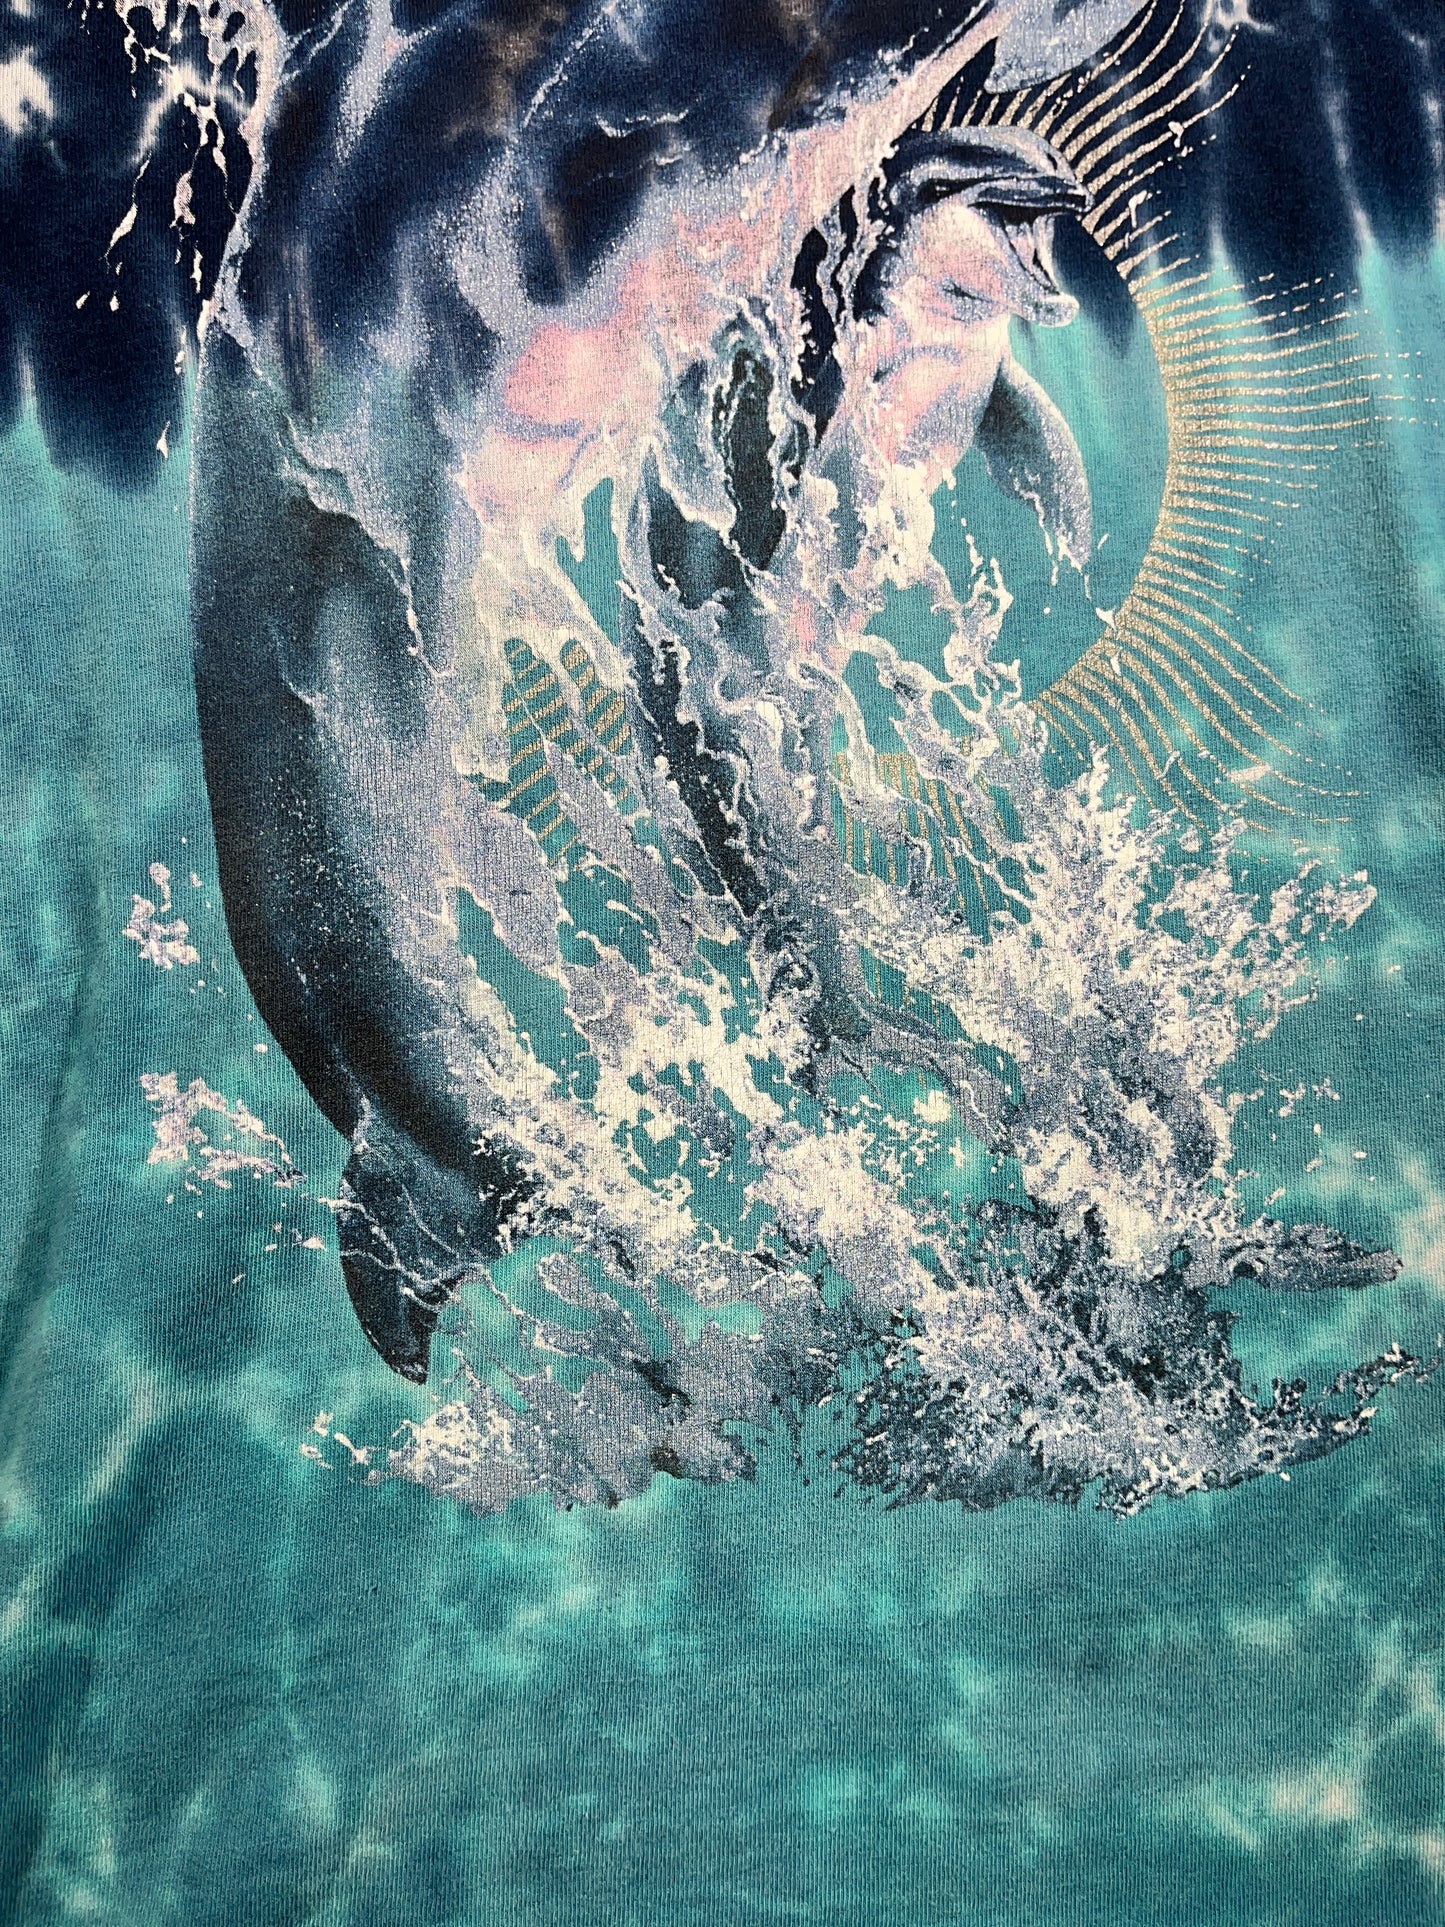 Vintage Dolphin T-Shirt Tie Dye Nature Majestic Animal Tee